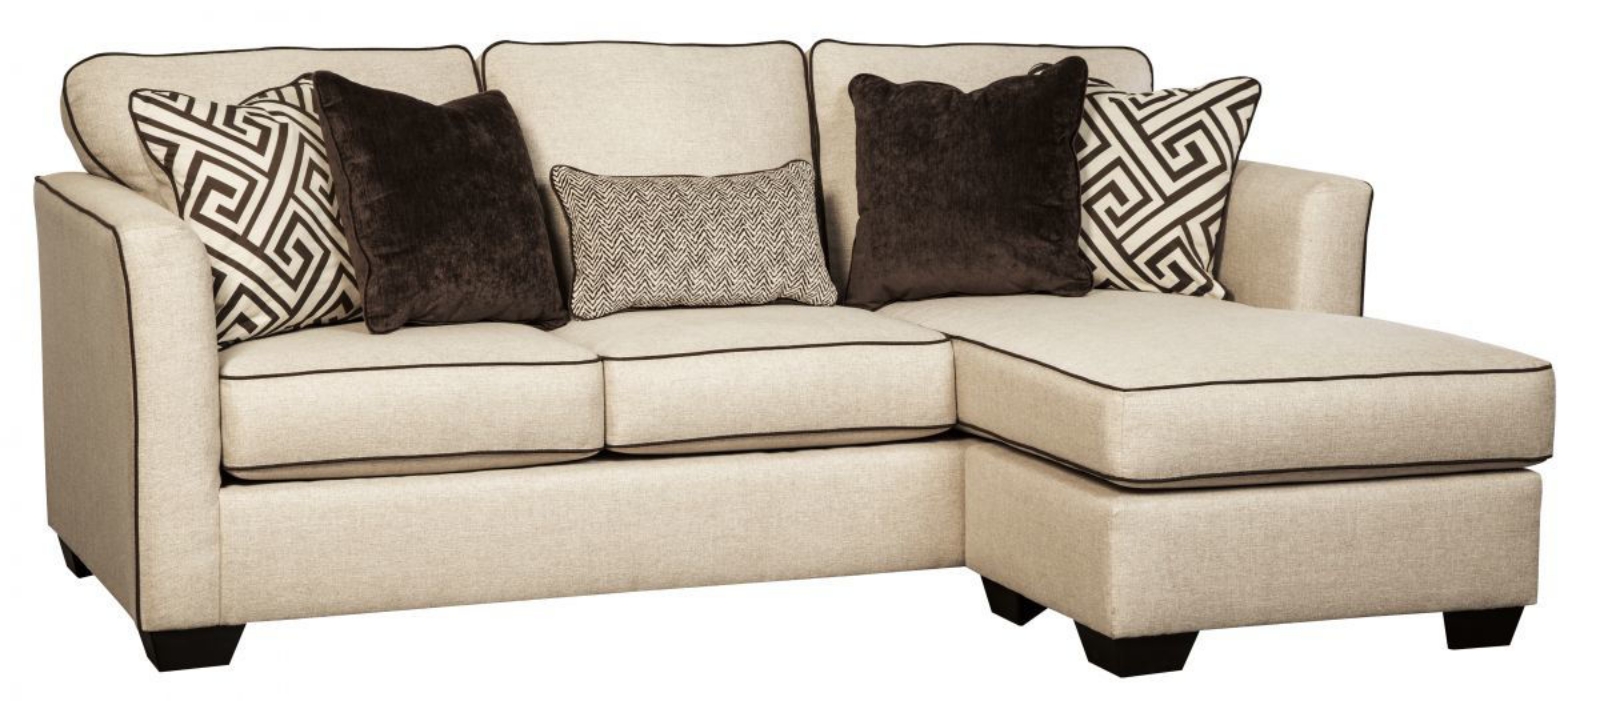 Picture of Carlinworth Sofa Chaise